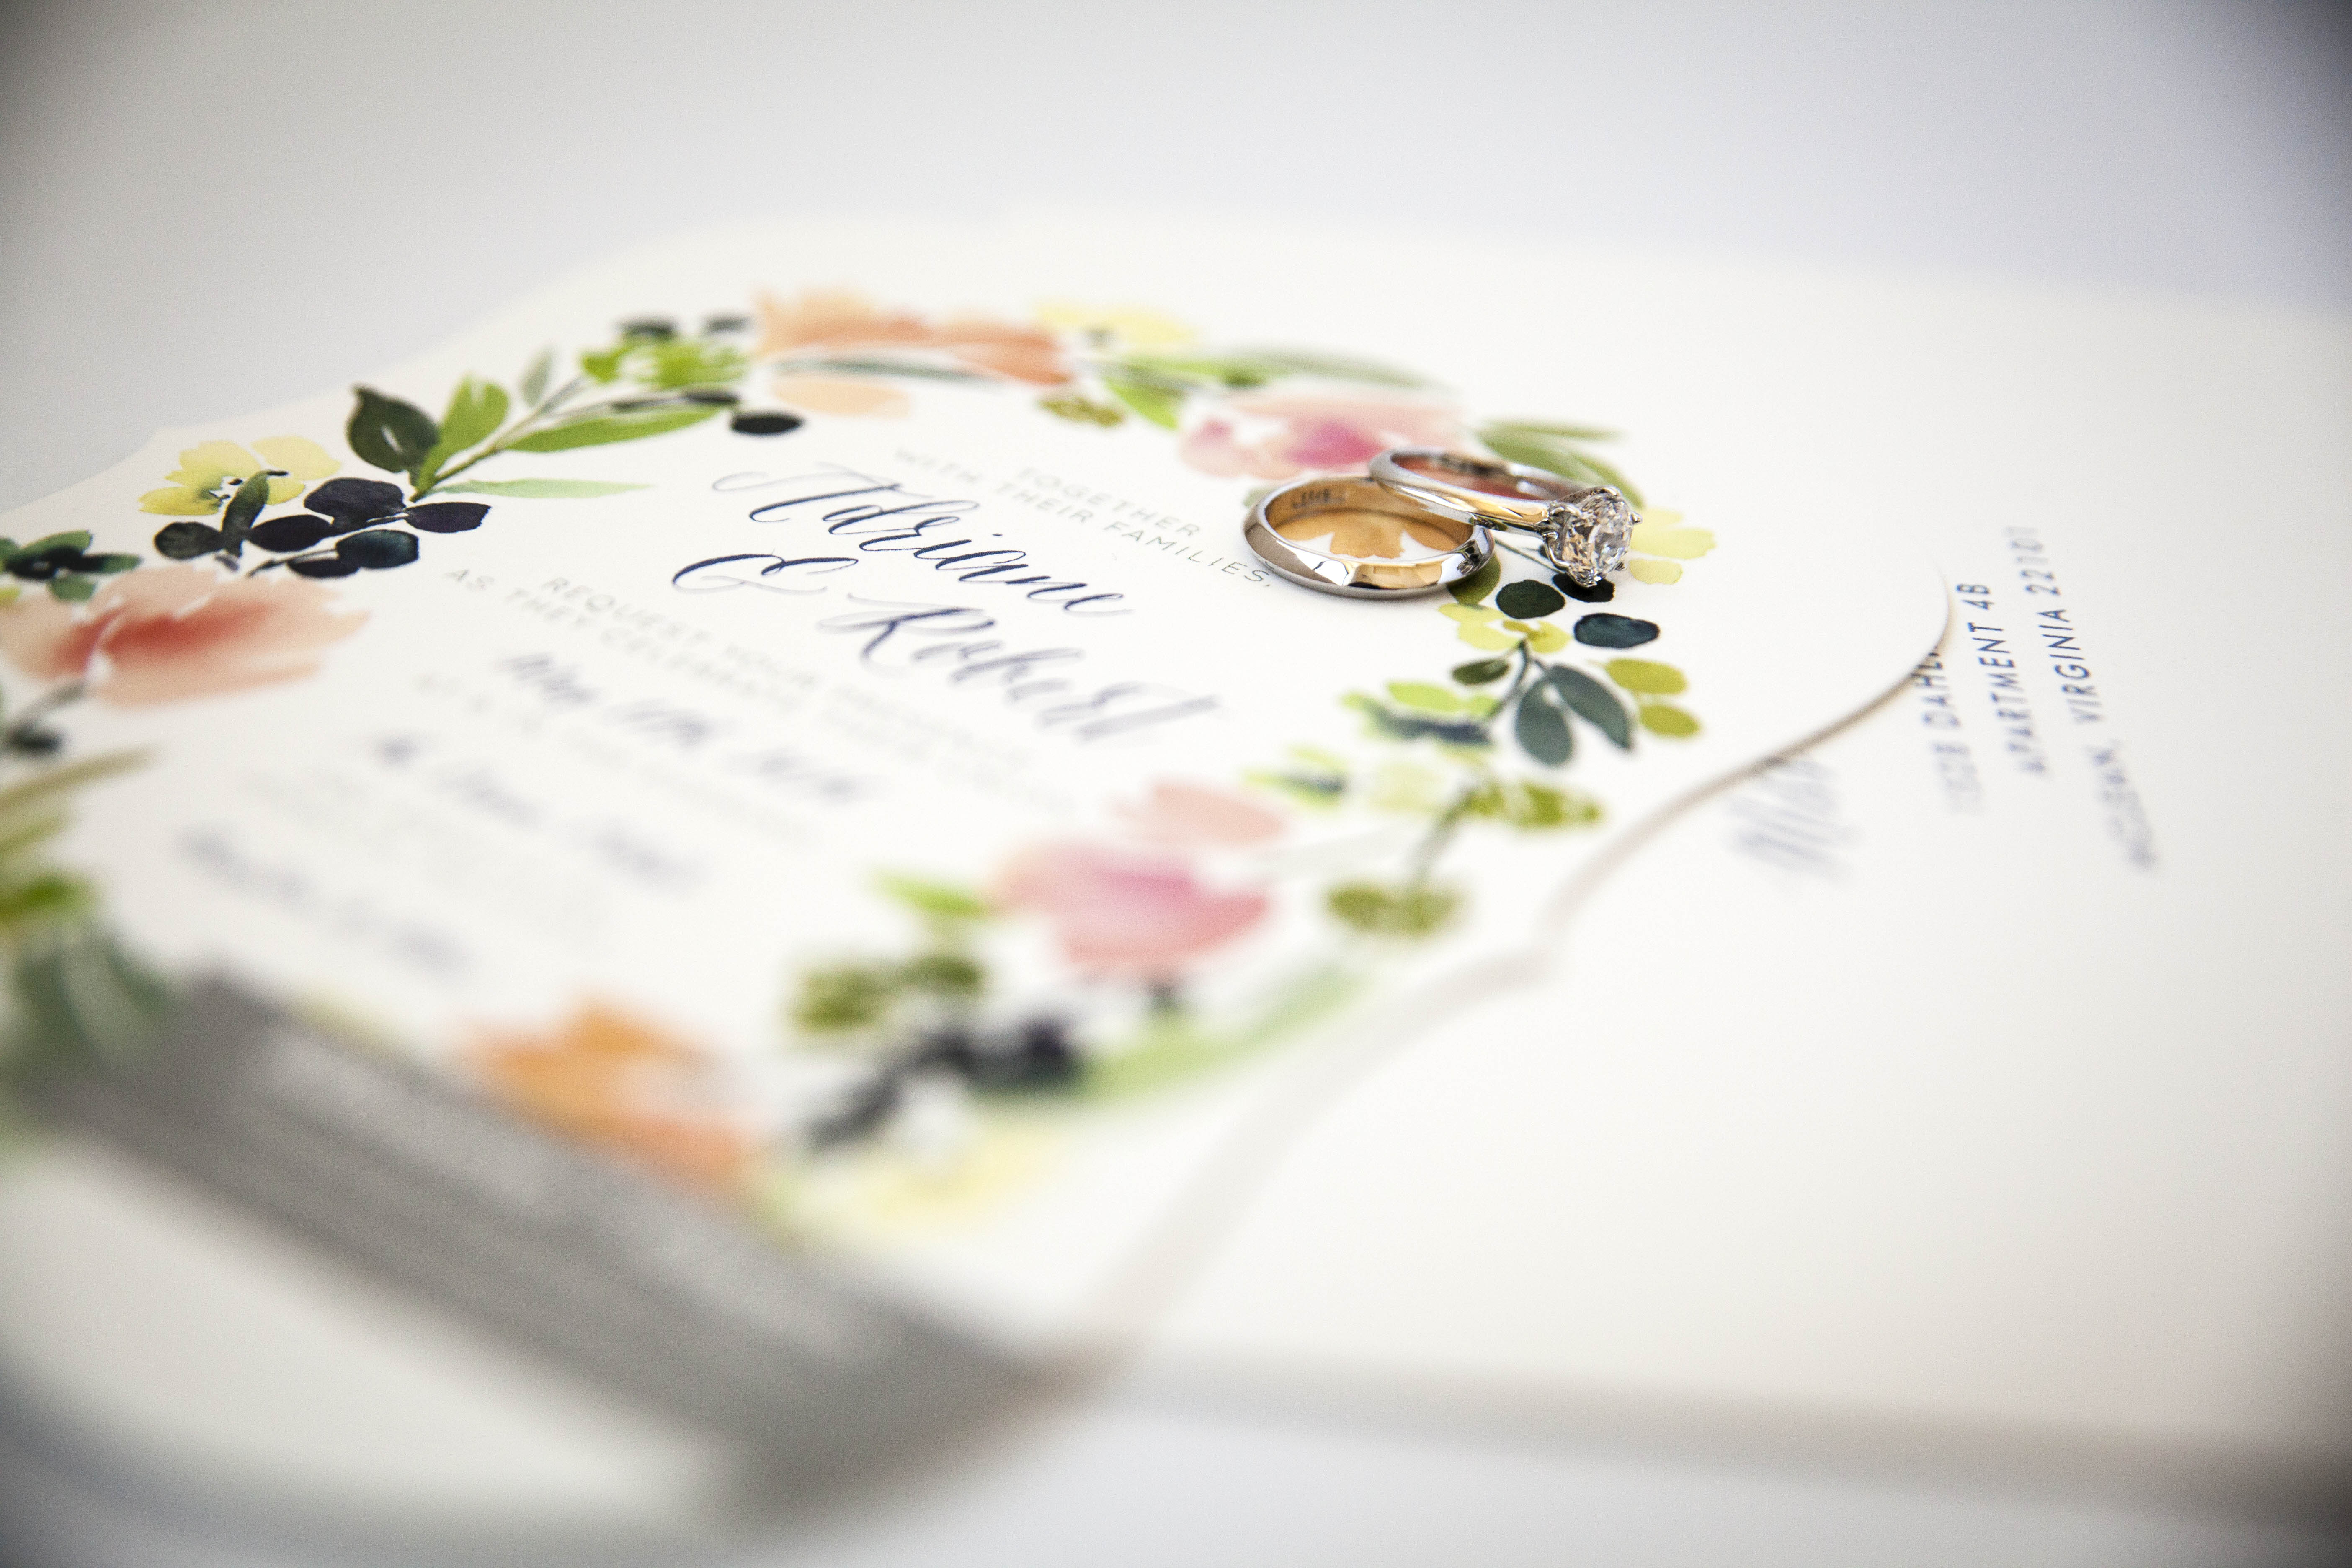 Questions to Ask When Ordering Wedding Invitations